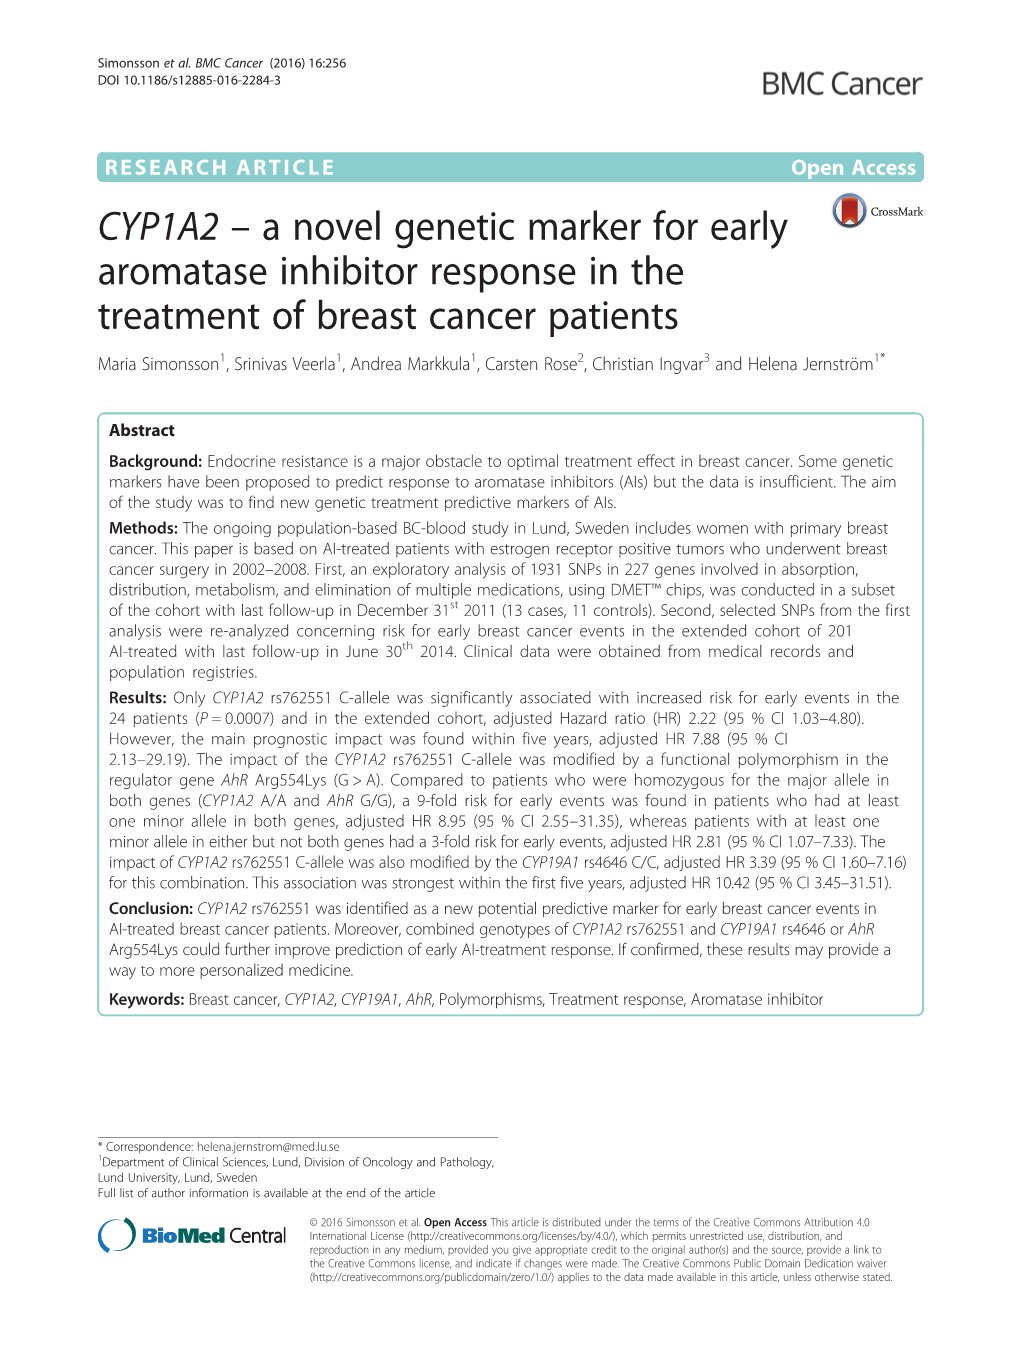 CYP1A2 – a Novel Genetic Marker for Early Aromatase Inhibitor Response